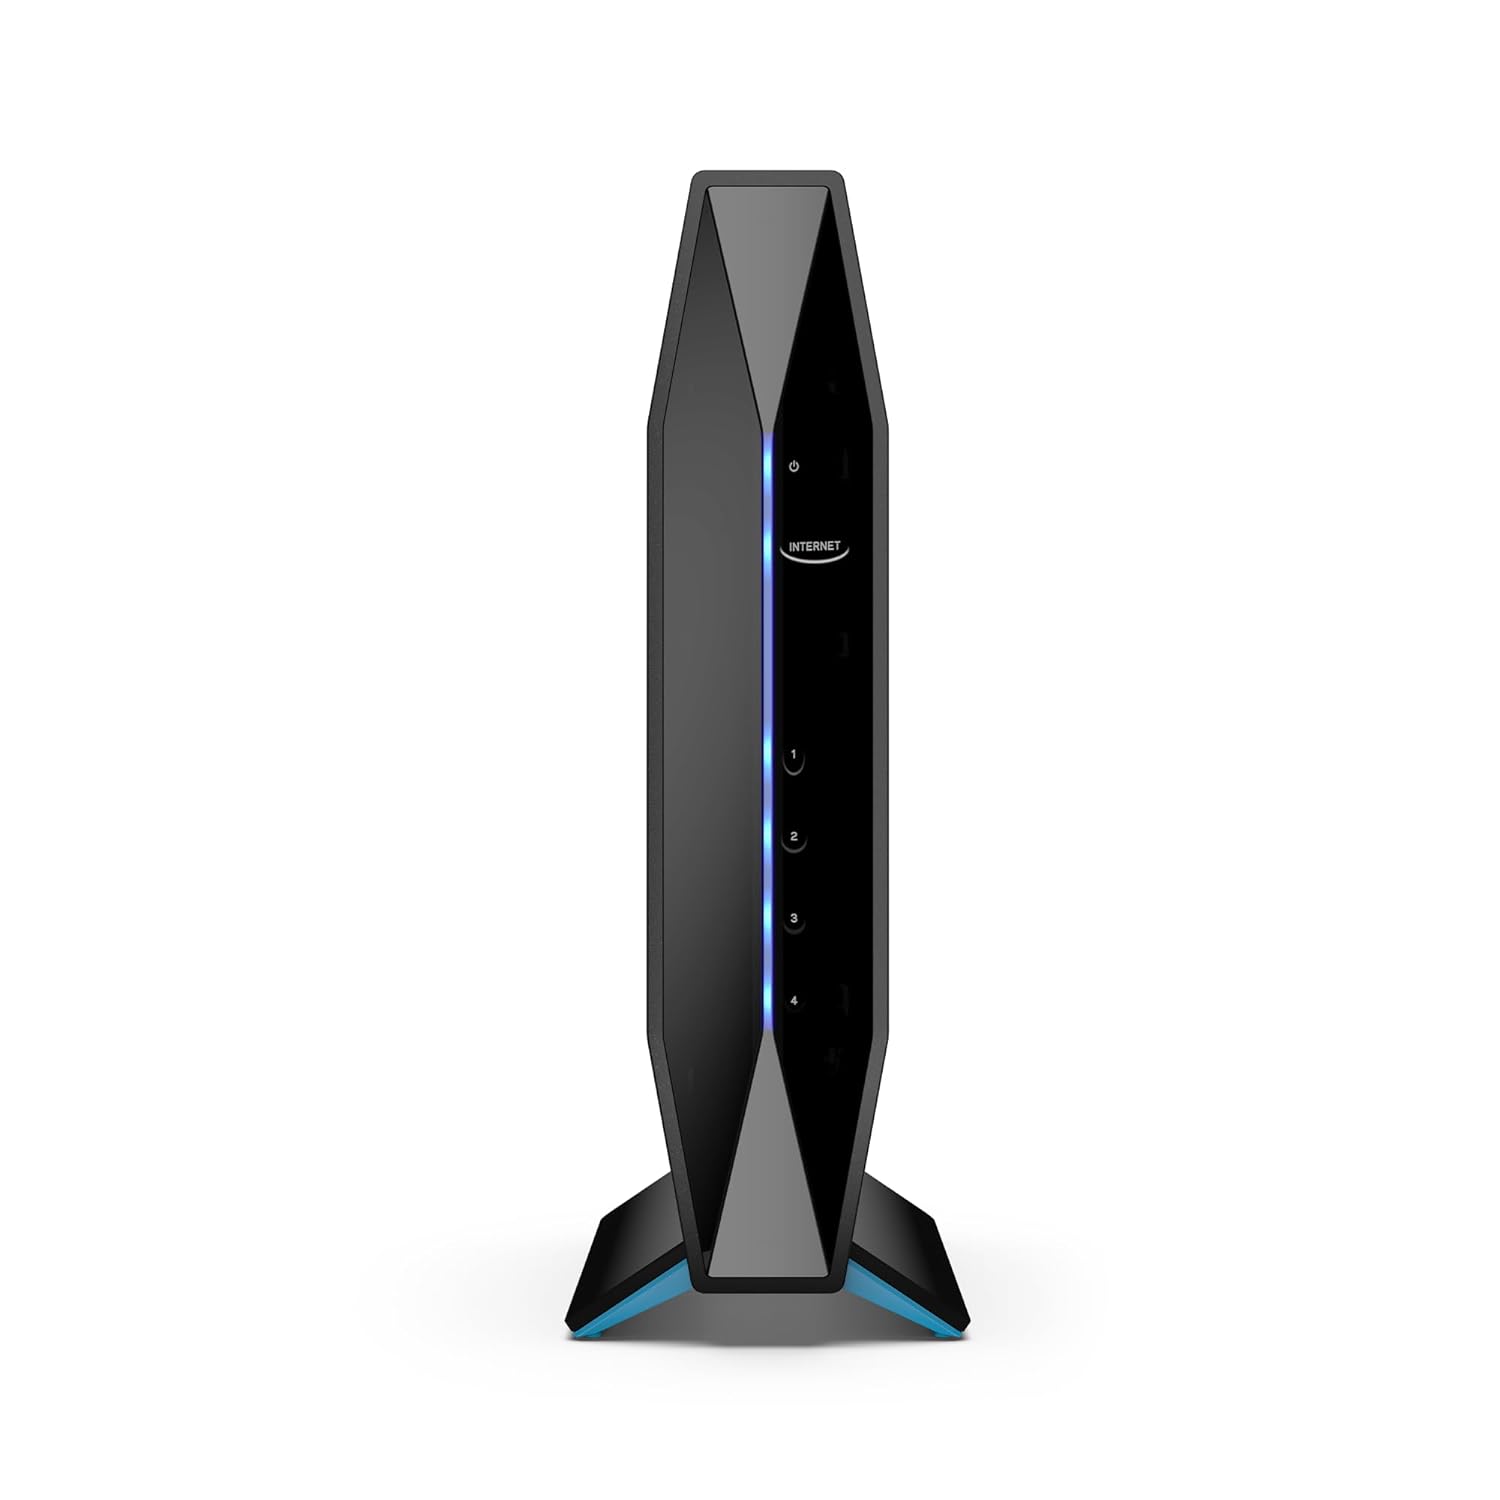 Linksys E8450 AX3200 WiFi 6 Router: Dual-Band Wireless Home Network, 4 Gigabit Ethernet Ports, Parental Controls, 3.2 Gbps, 2…